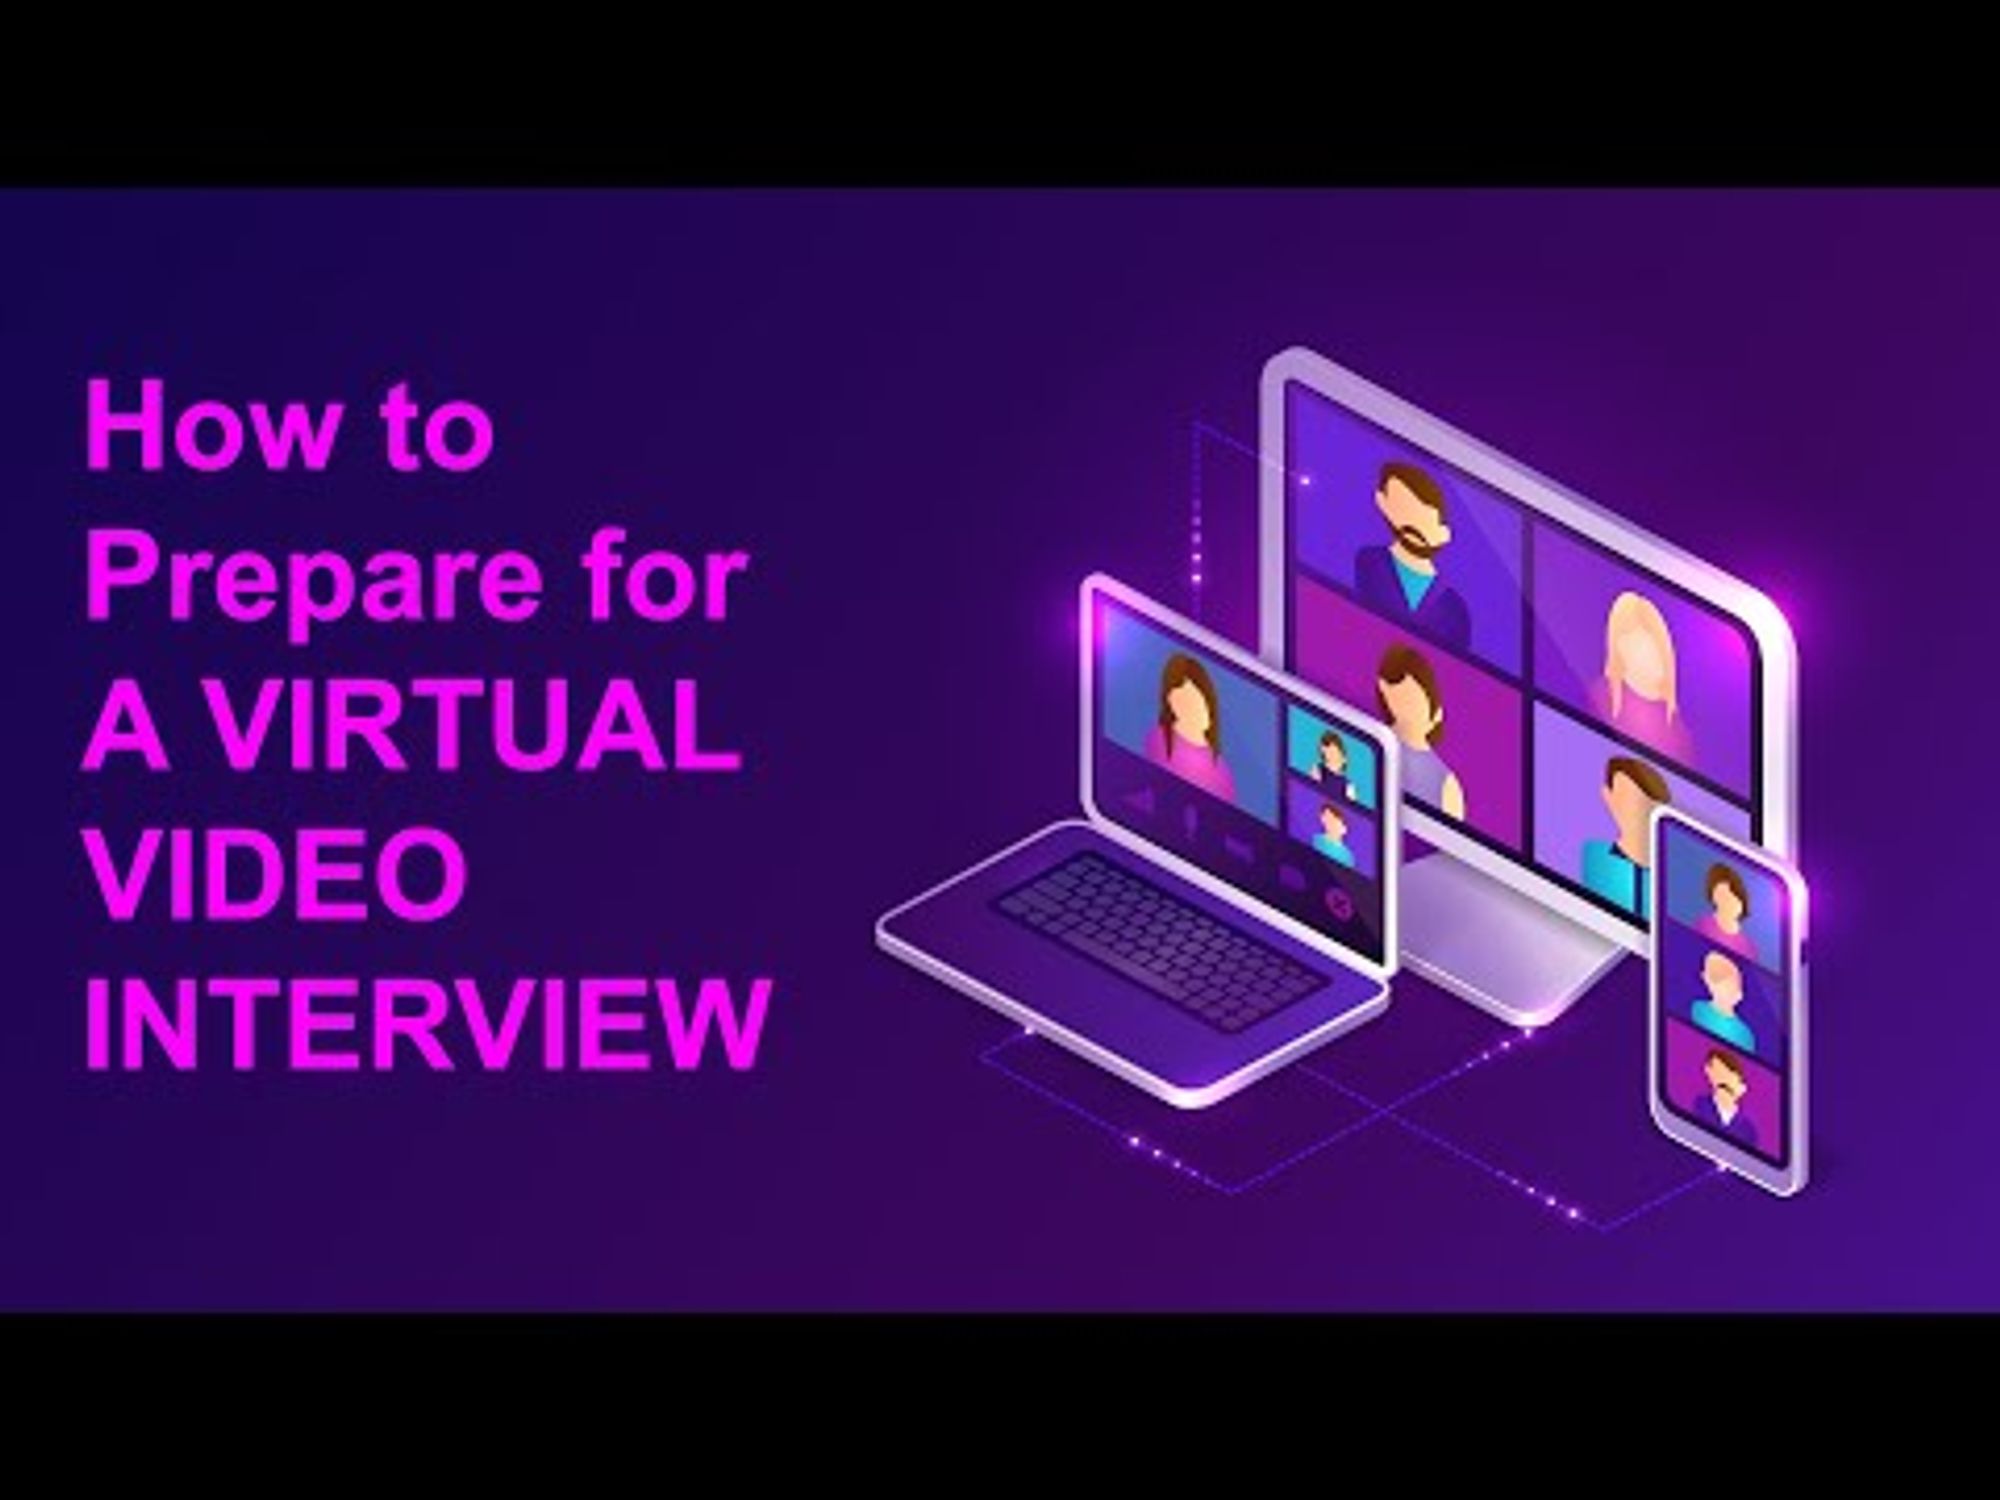 How to Prepare for A VIRTUAL VIDEO INTERVIEW?